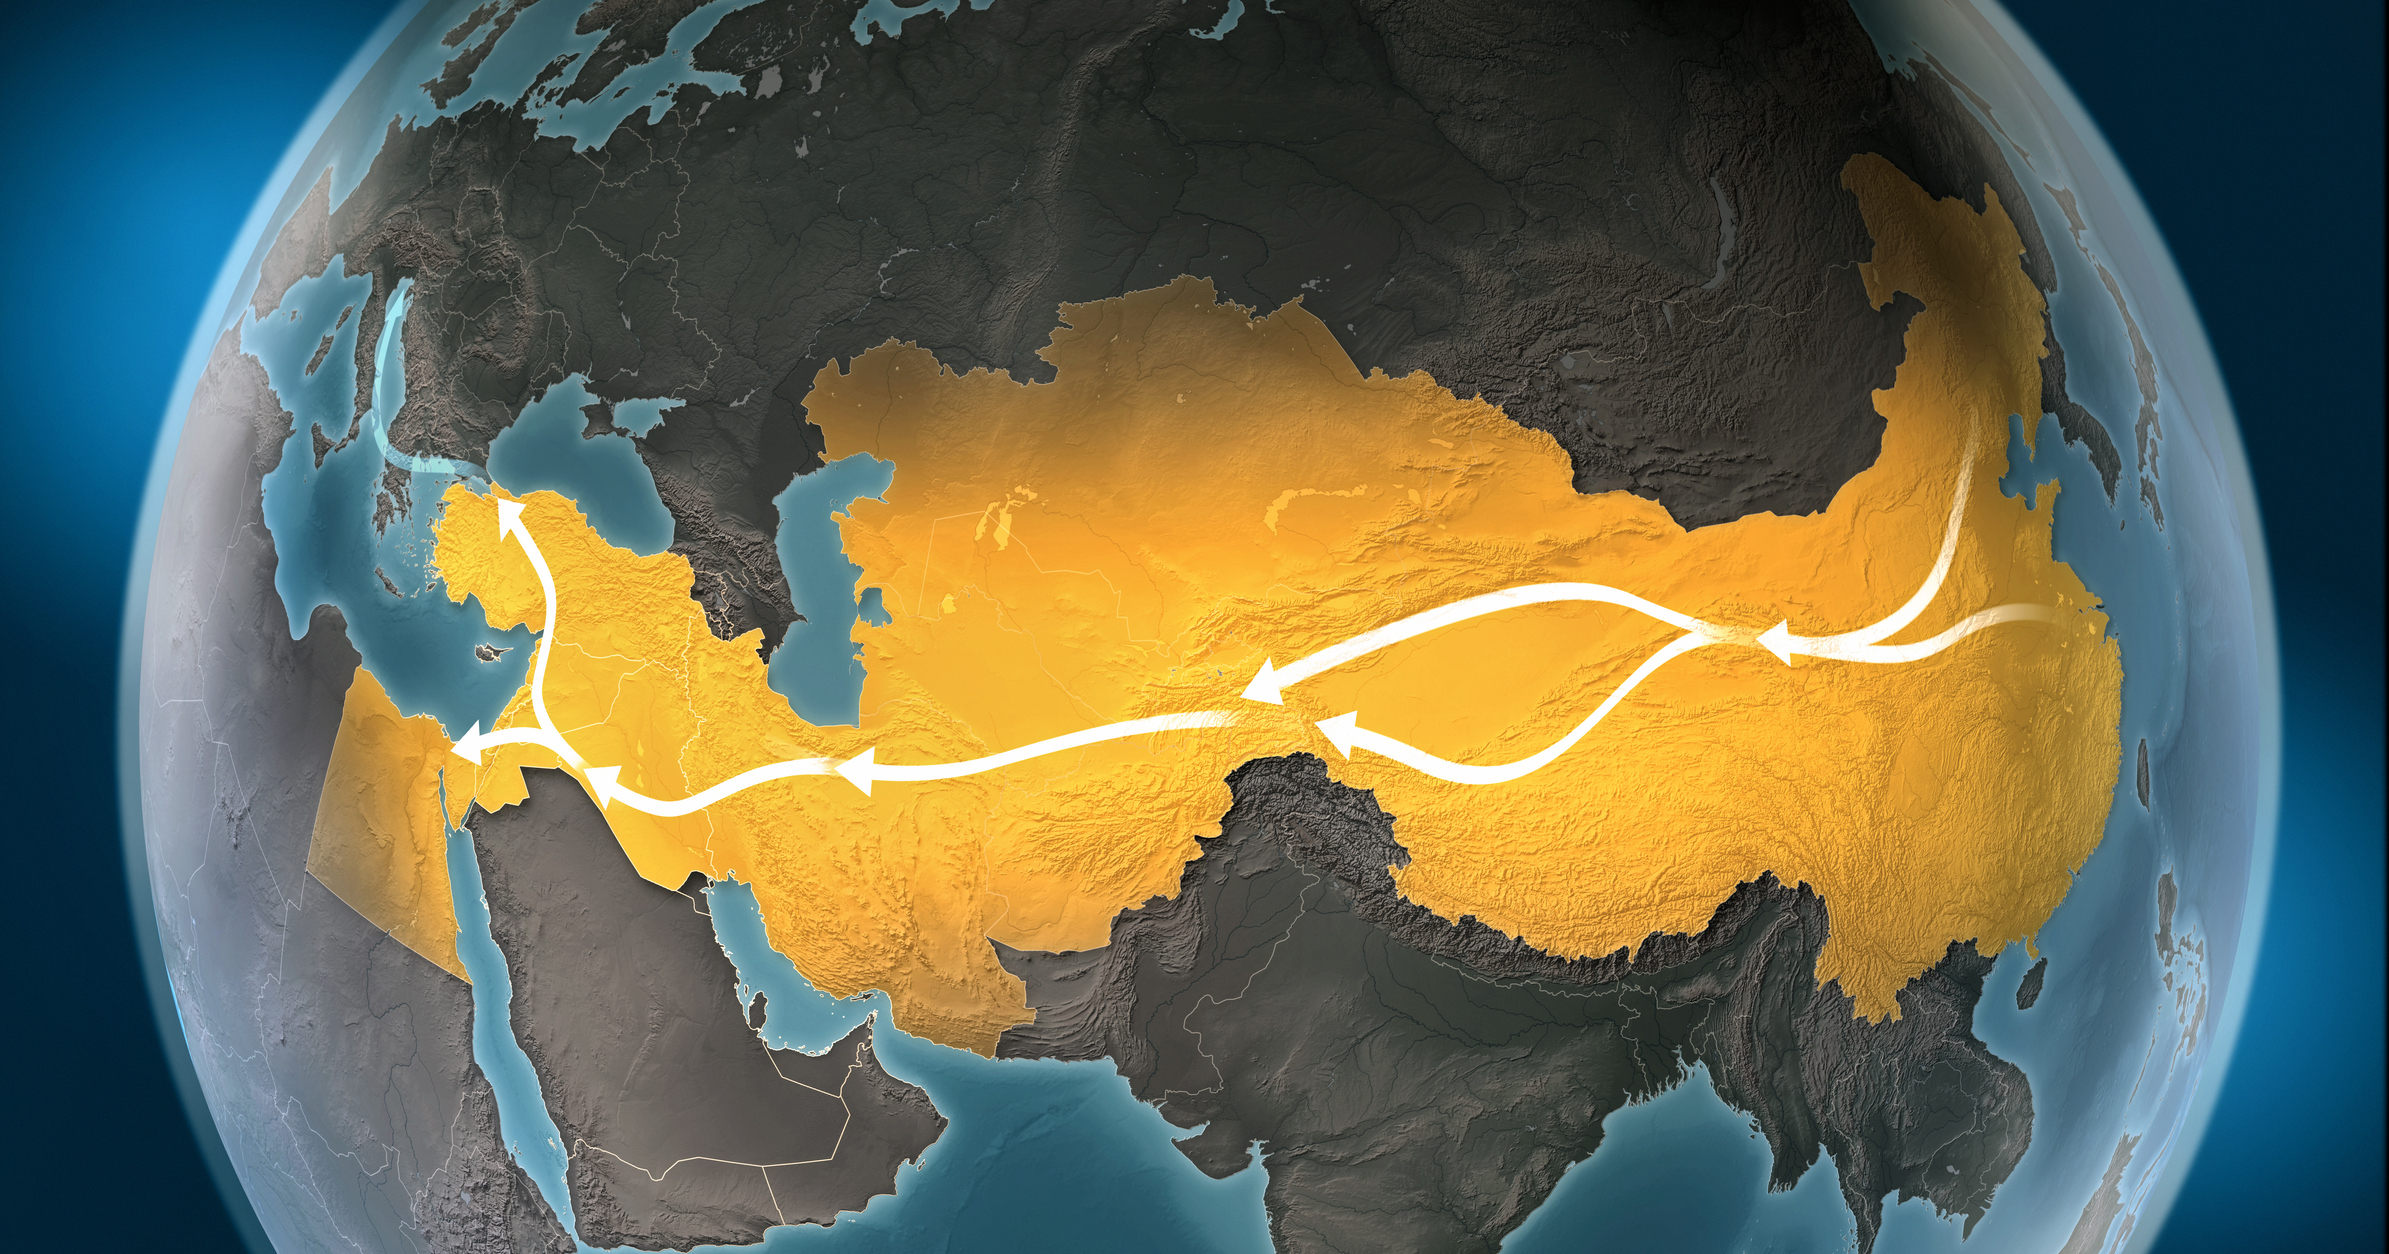 China's Belt and Road - Middle East